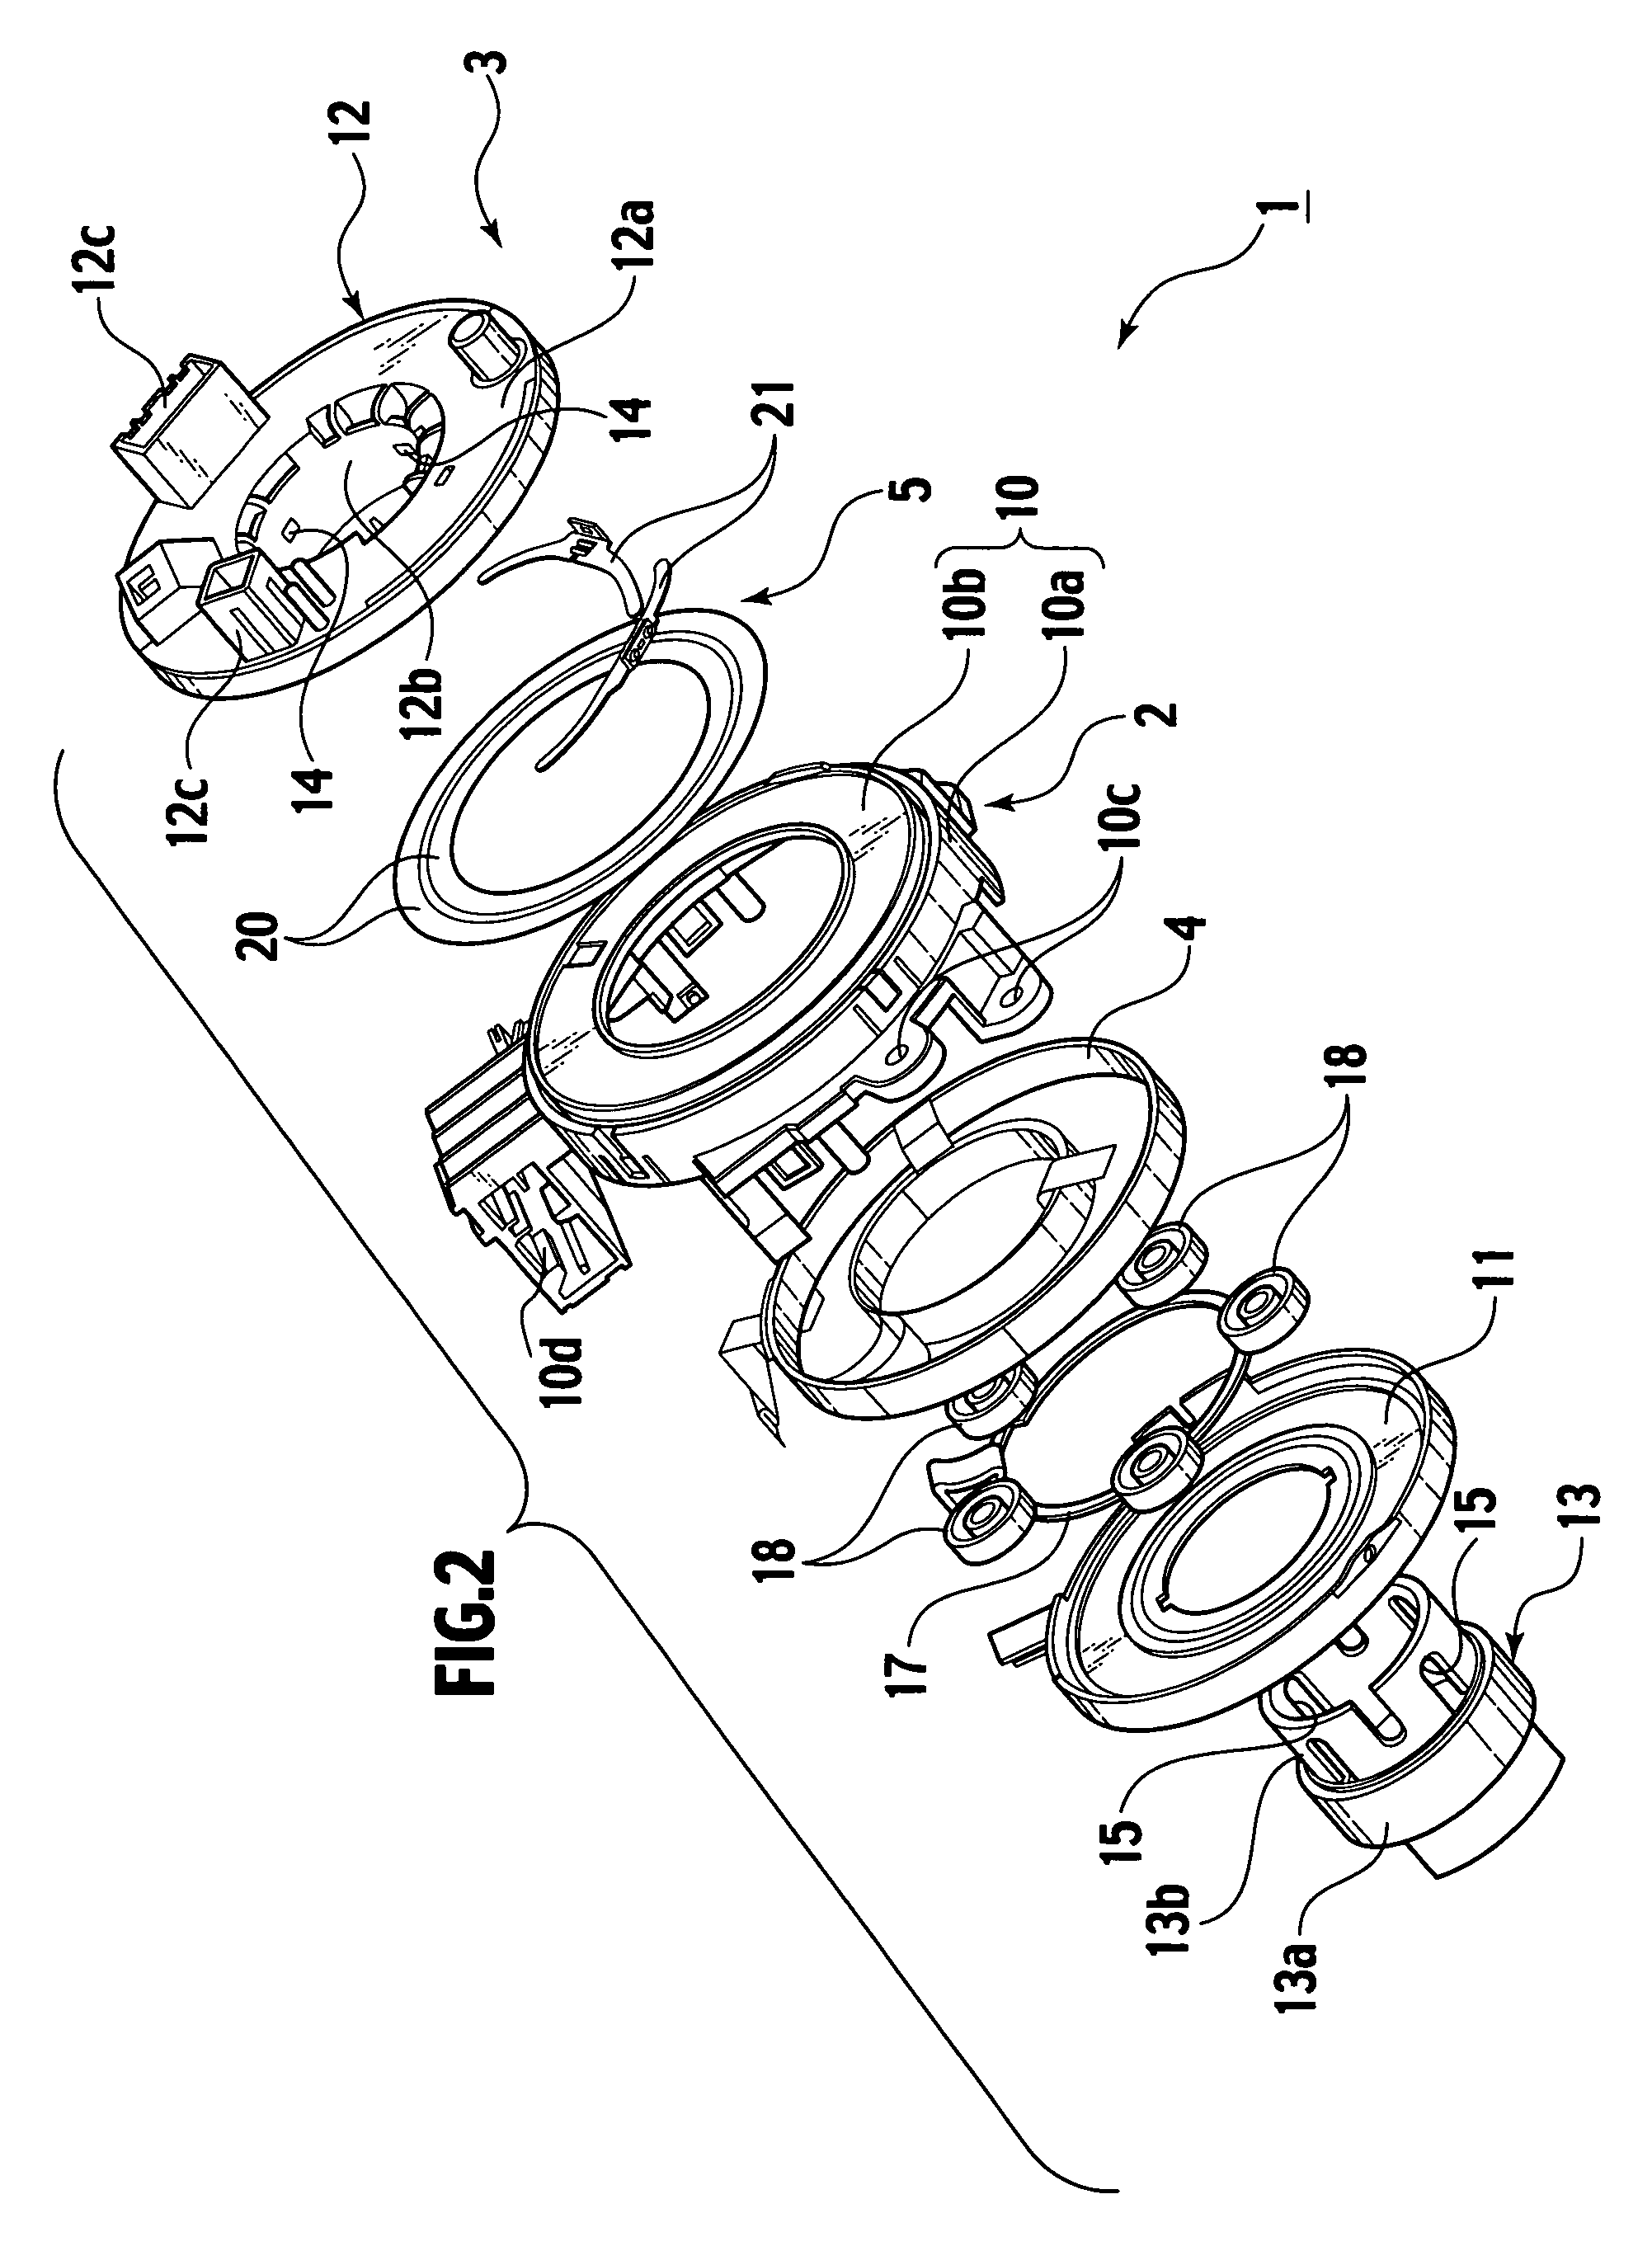 Rotary connector device